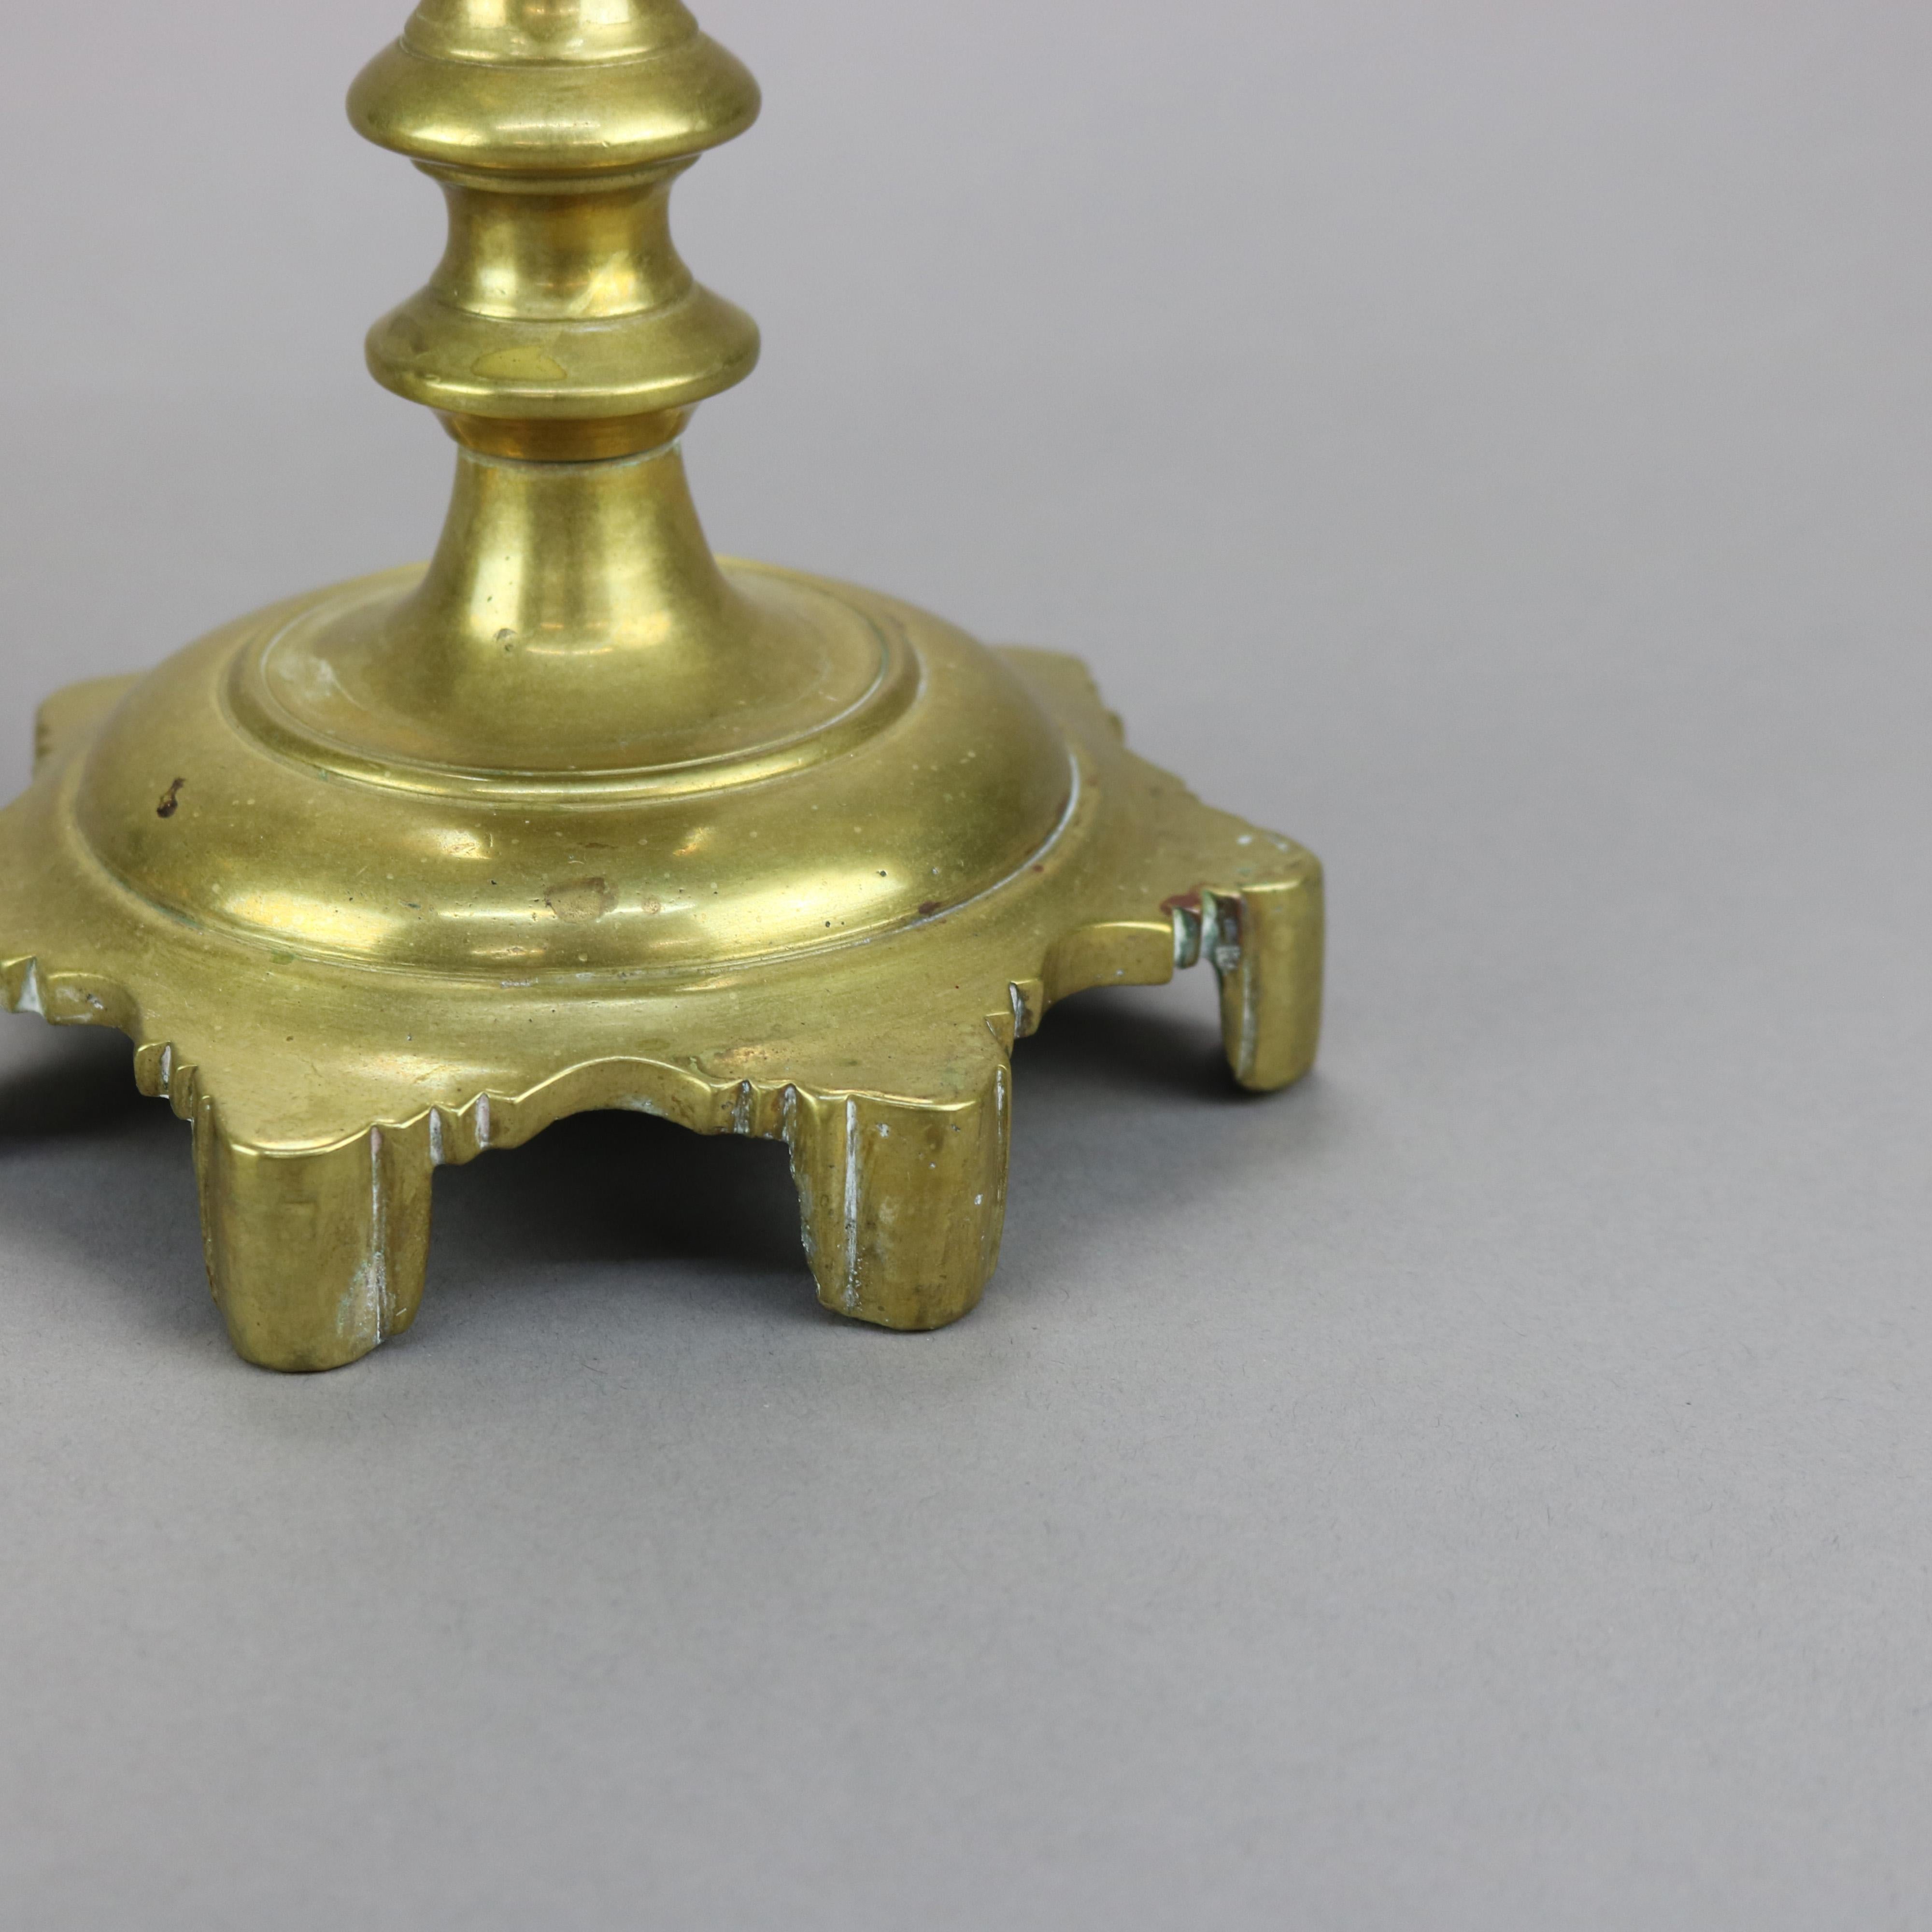 Antique Pair of Early American Brass Balustrade Footed Candlesticks 19th C For Sale 7